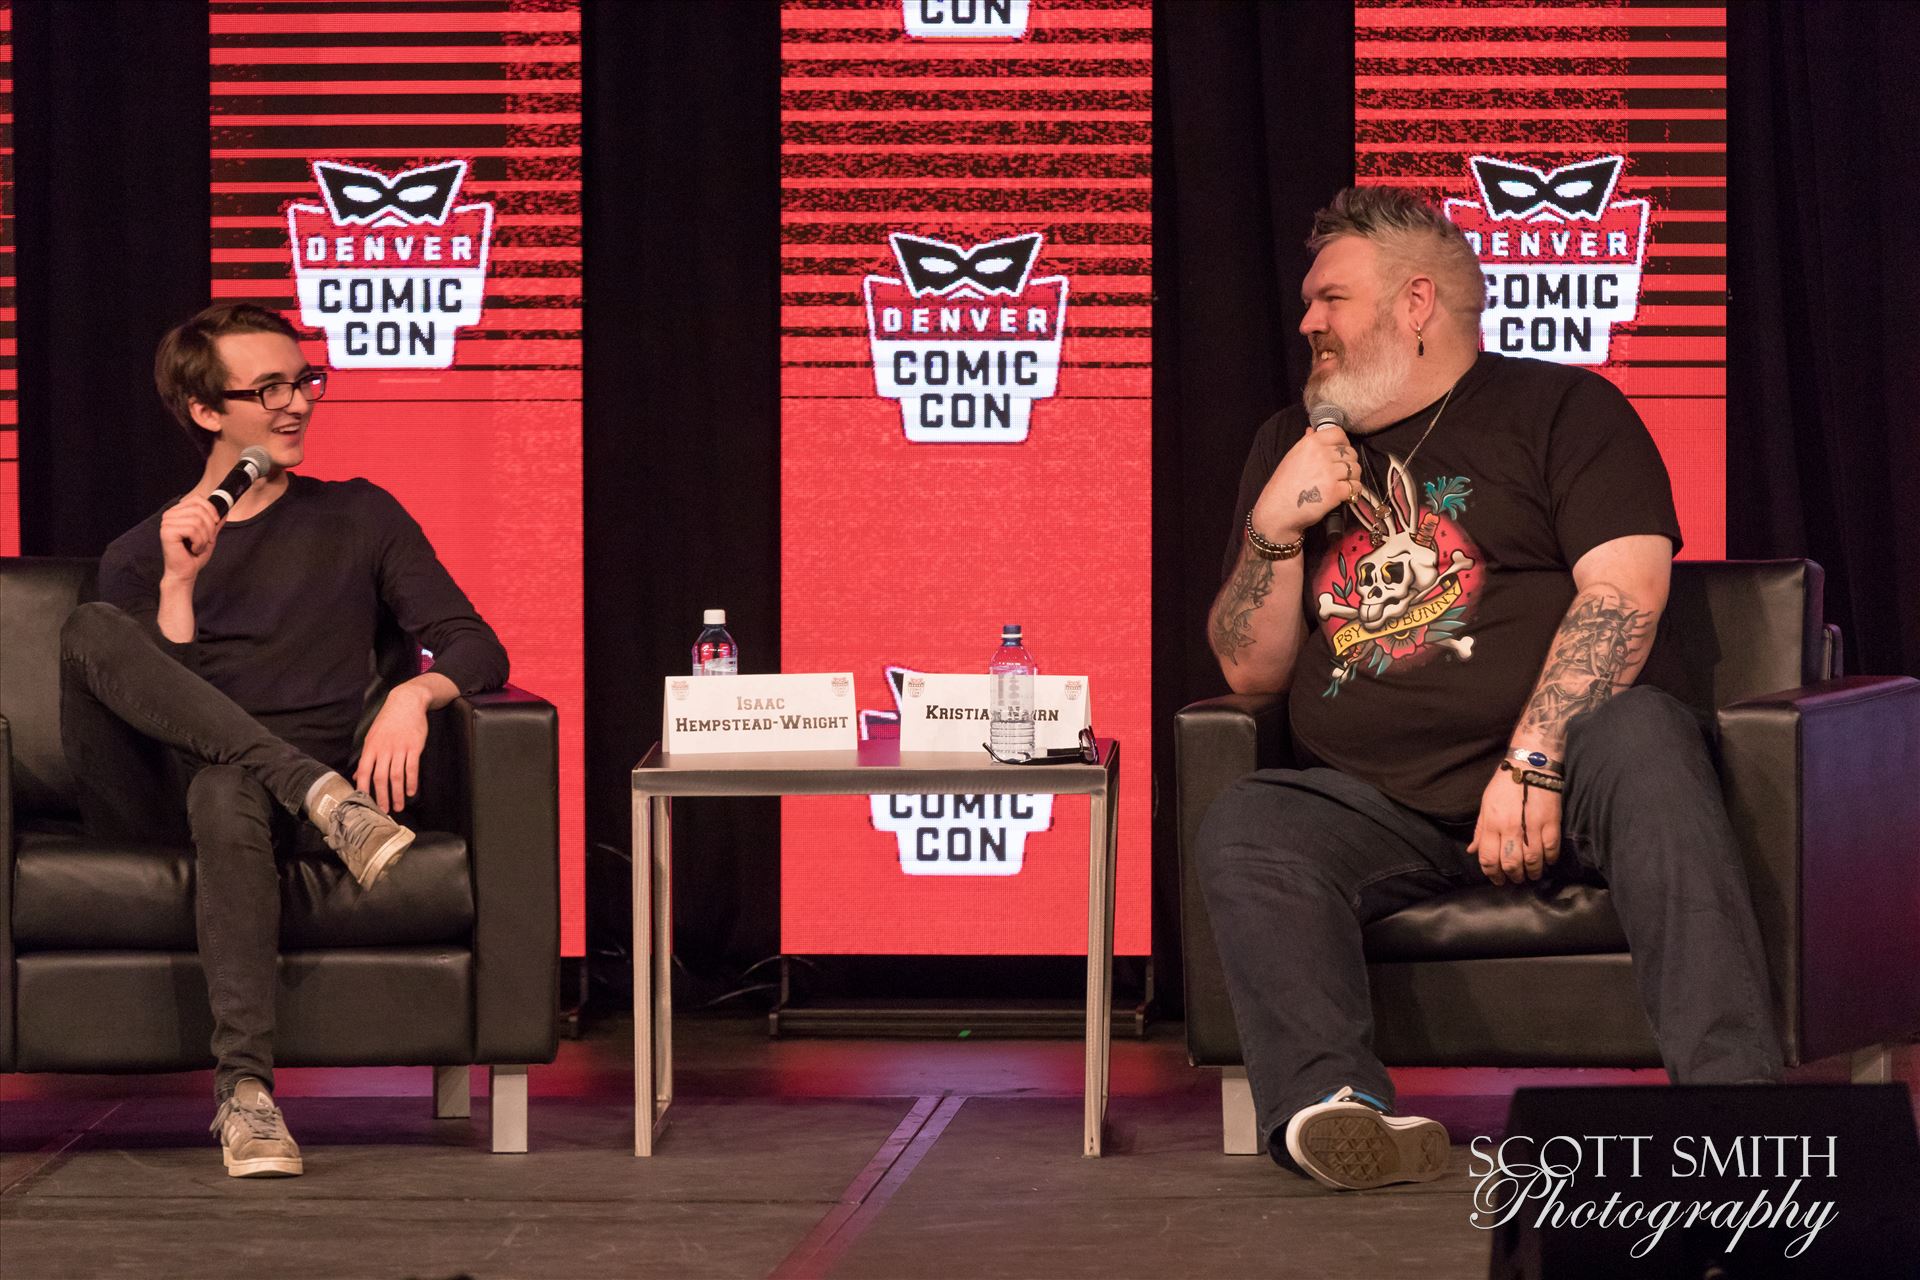 Game of Thrones'-  Bran and Hodor, Isaac Hempstead Wright and Kristian Nairn at Denver Comic Con 2018  by Scott Smith Photos